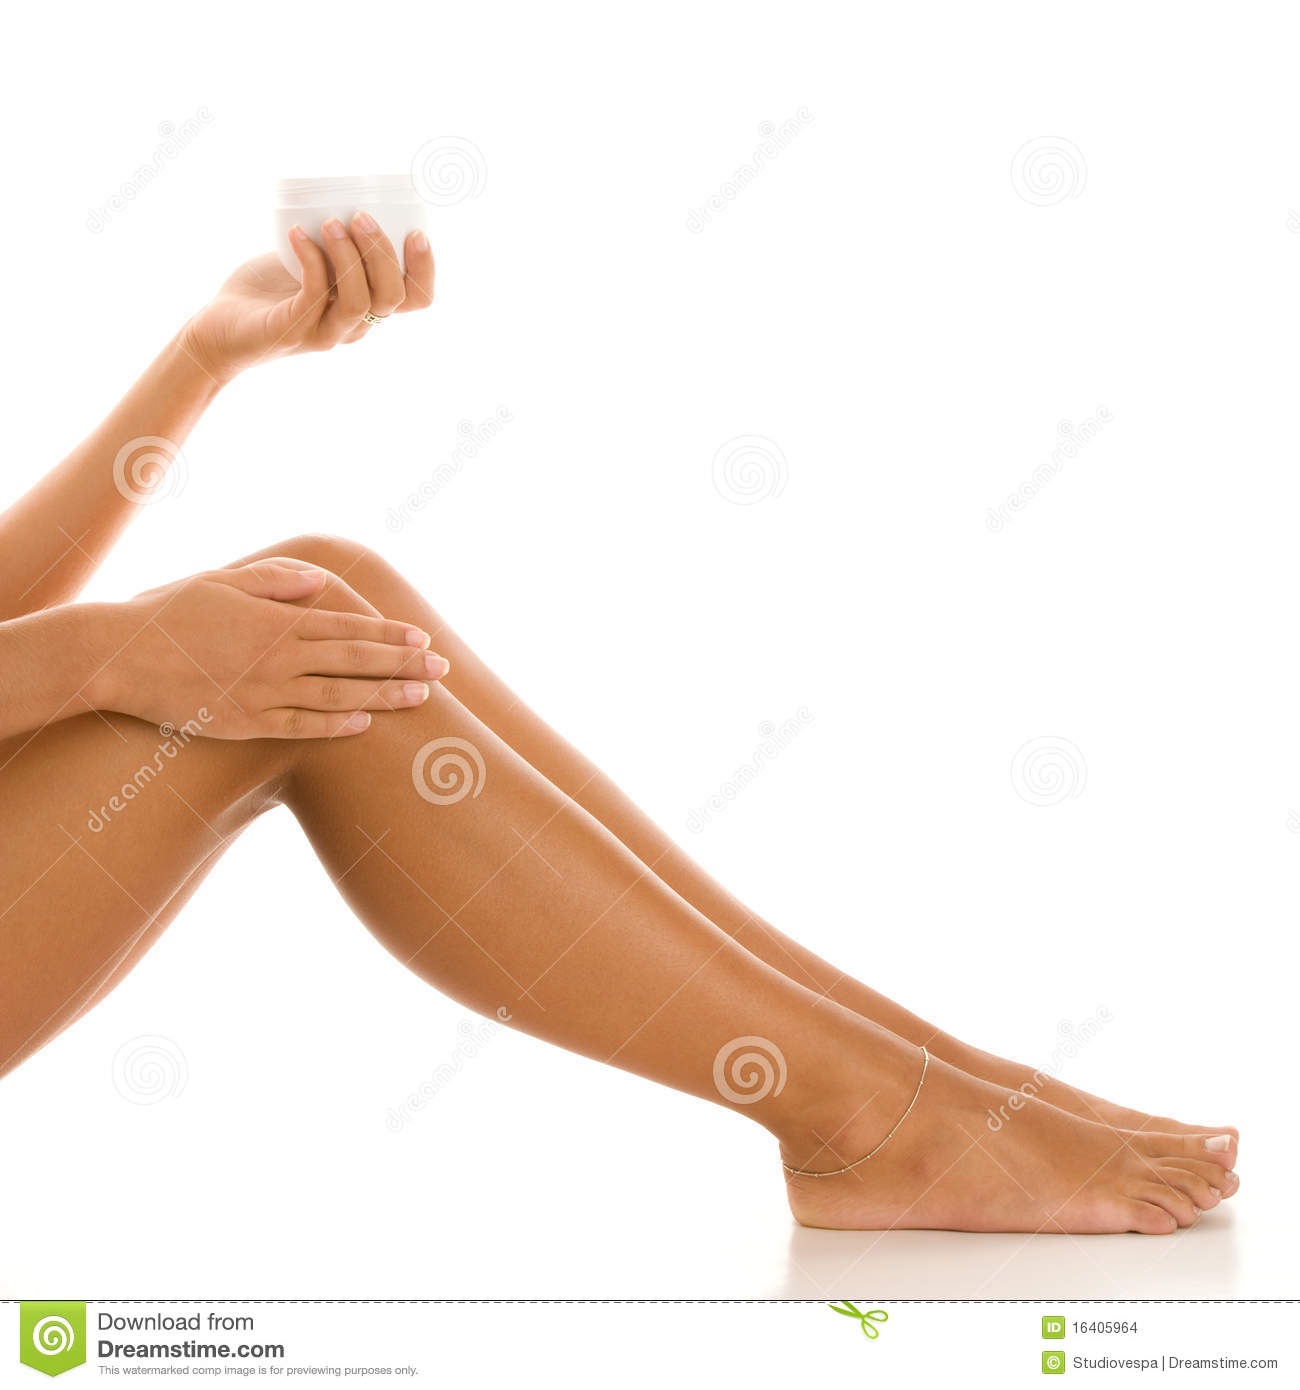 Woman With Jar Of Body Lotion Stock Images   Image  16405964